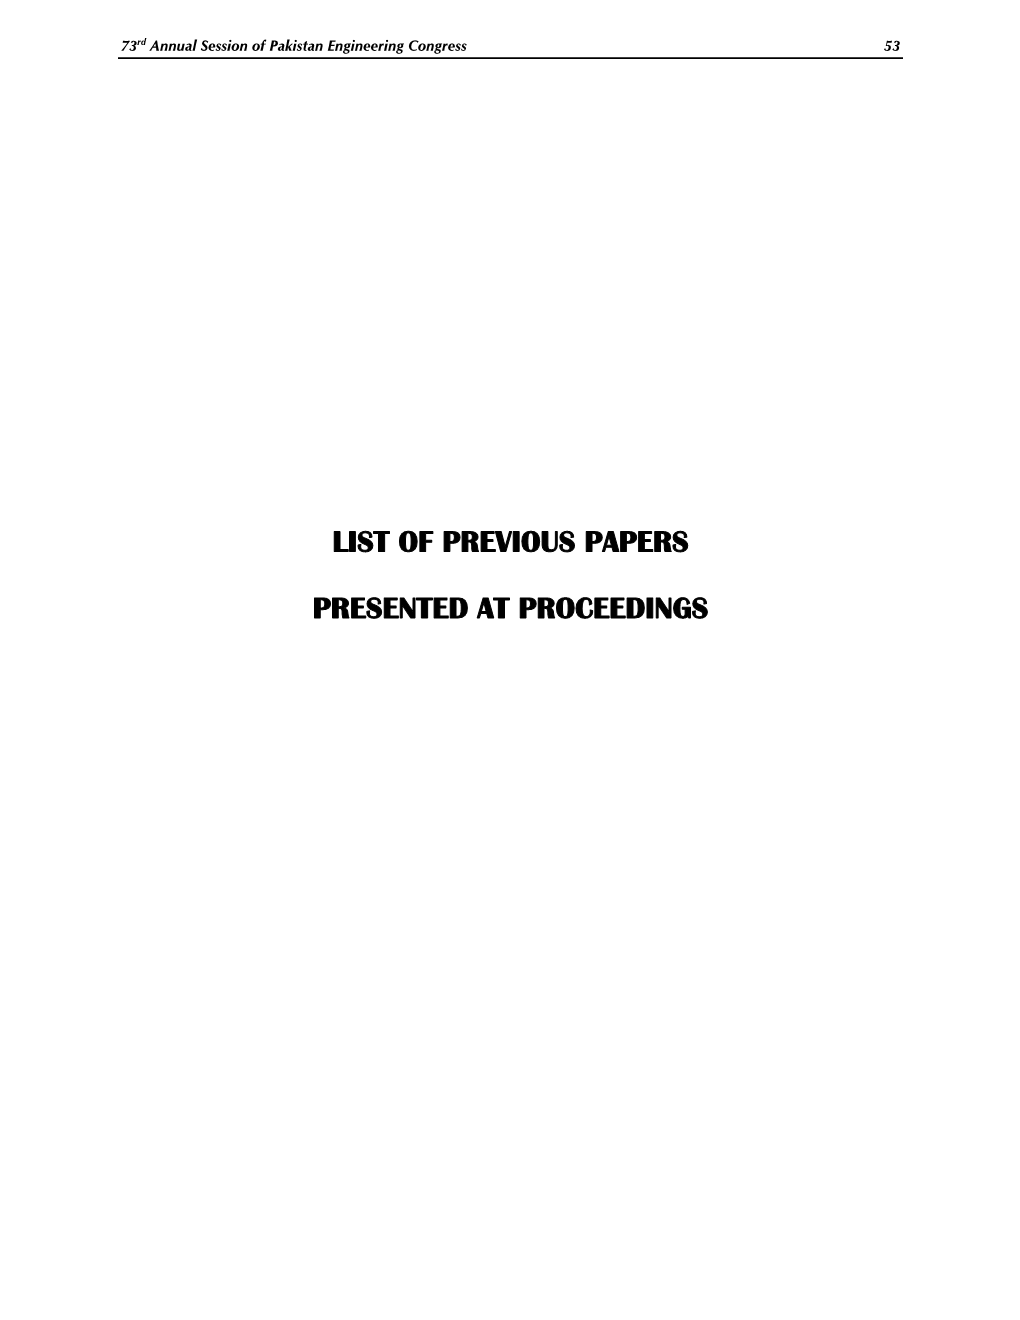 List of Previous Papers Presented at Proceedings